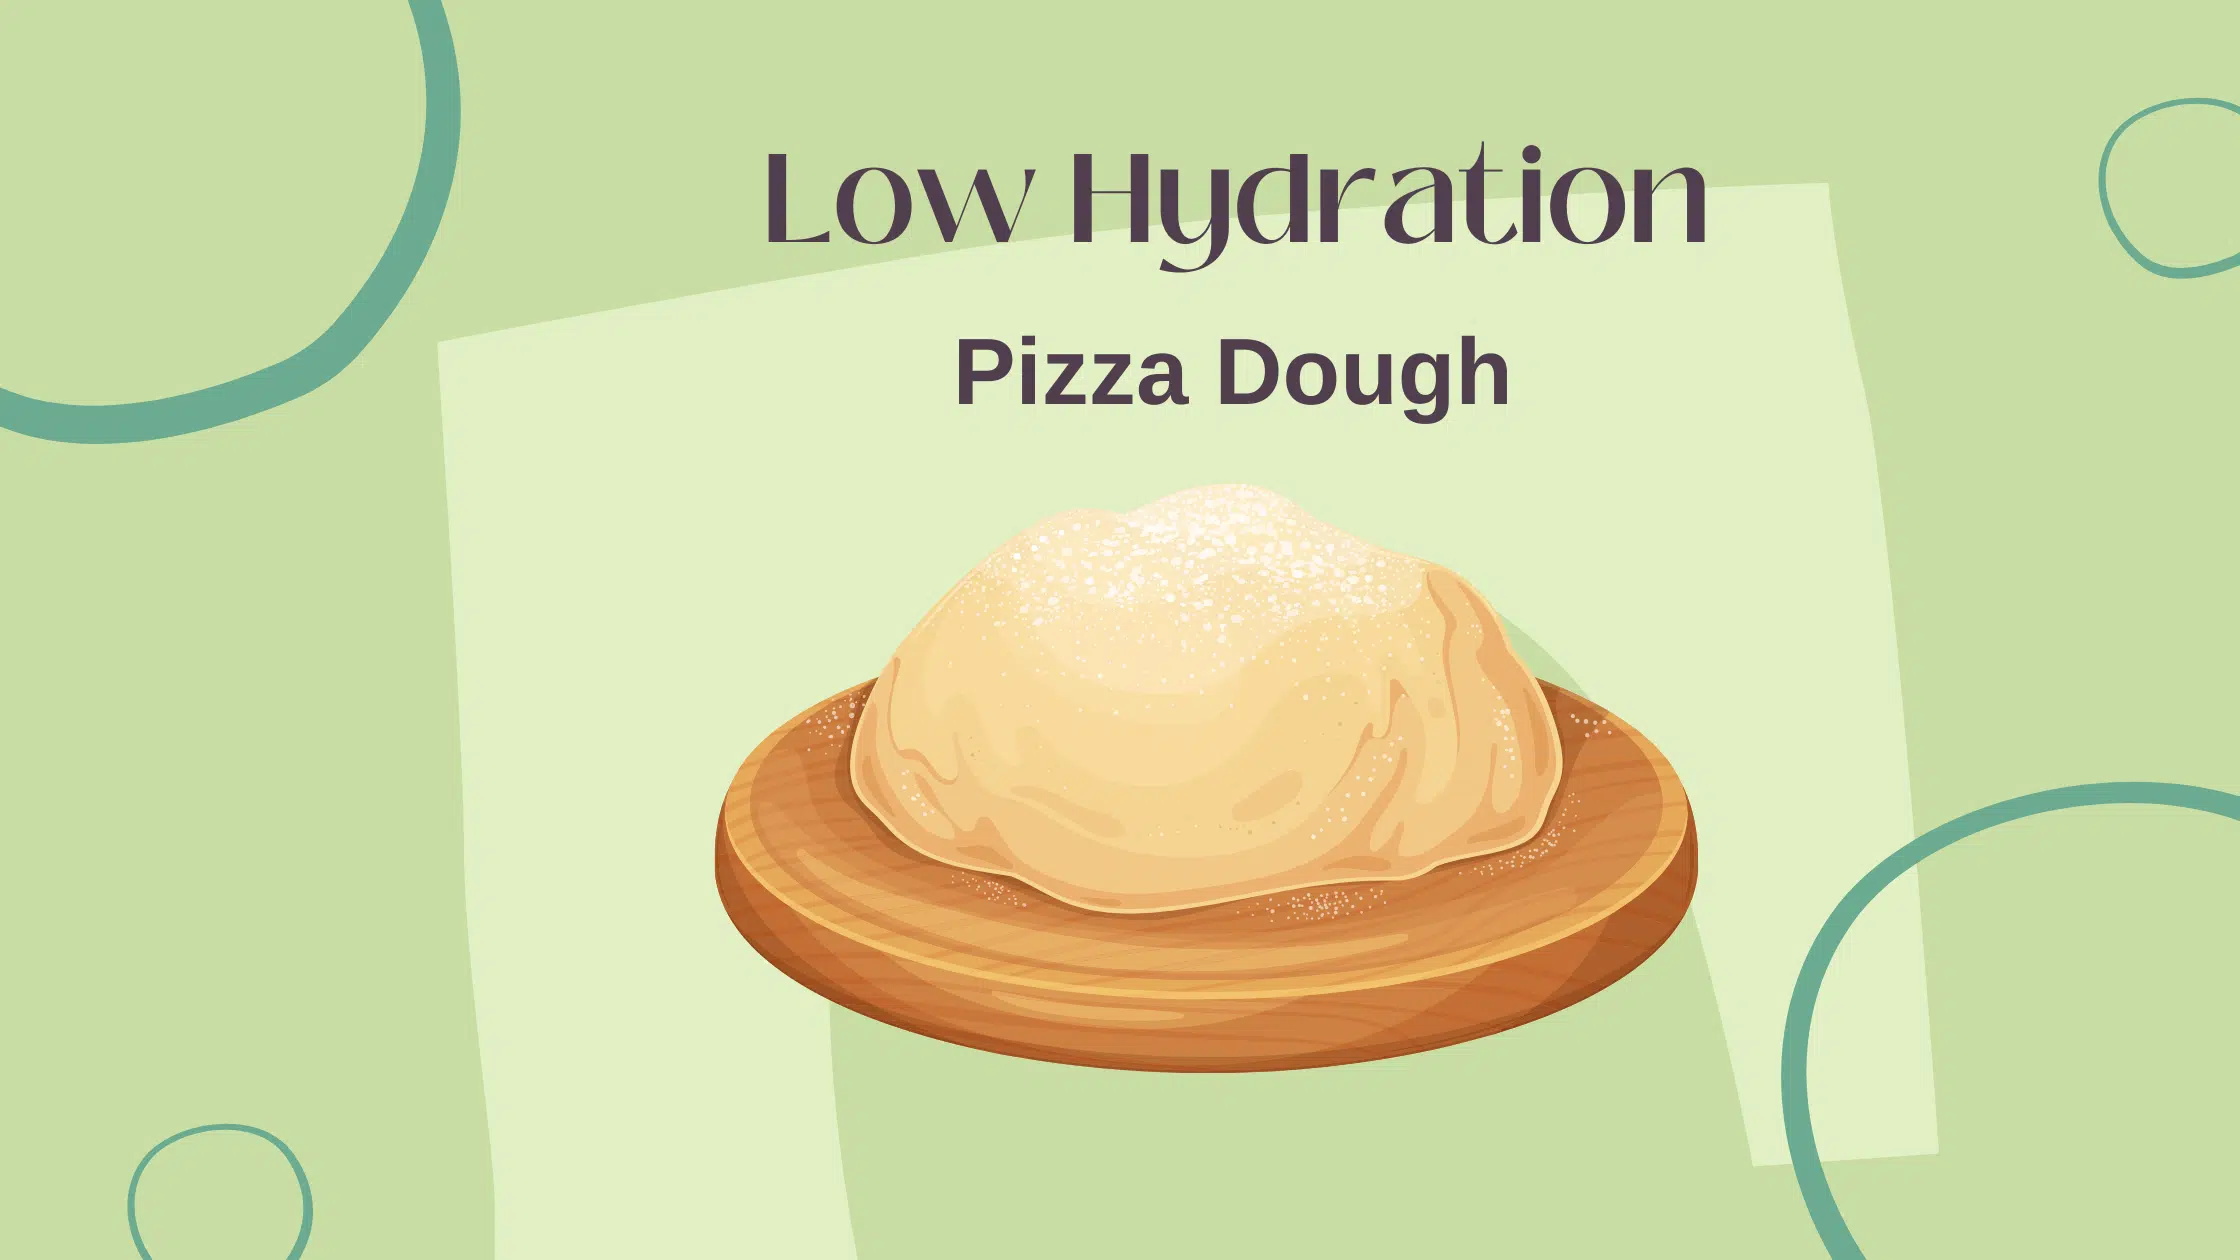 Low Hydration Pizza Dough